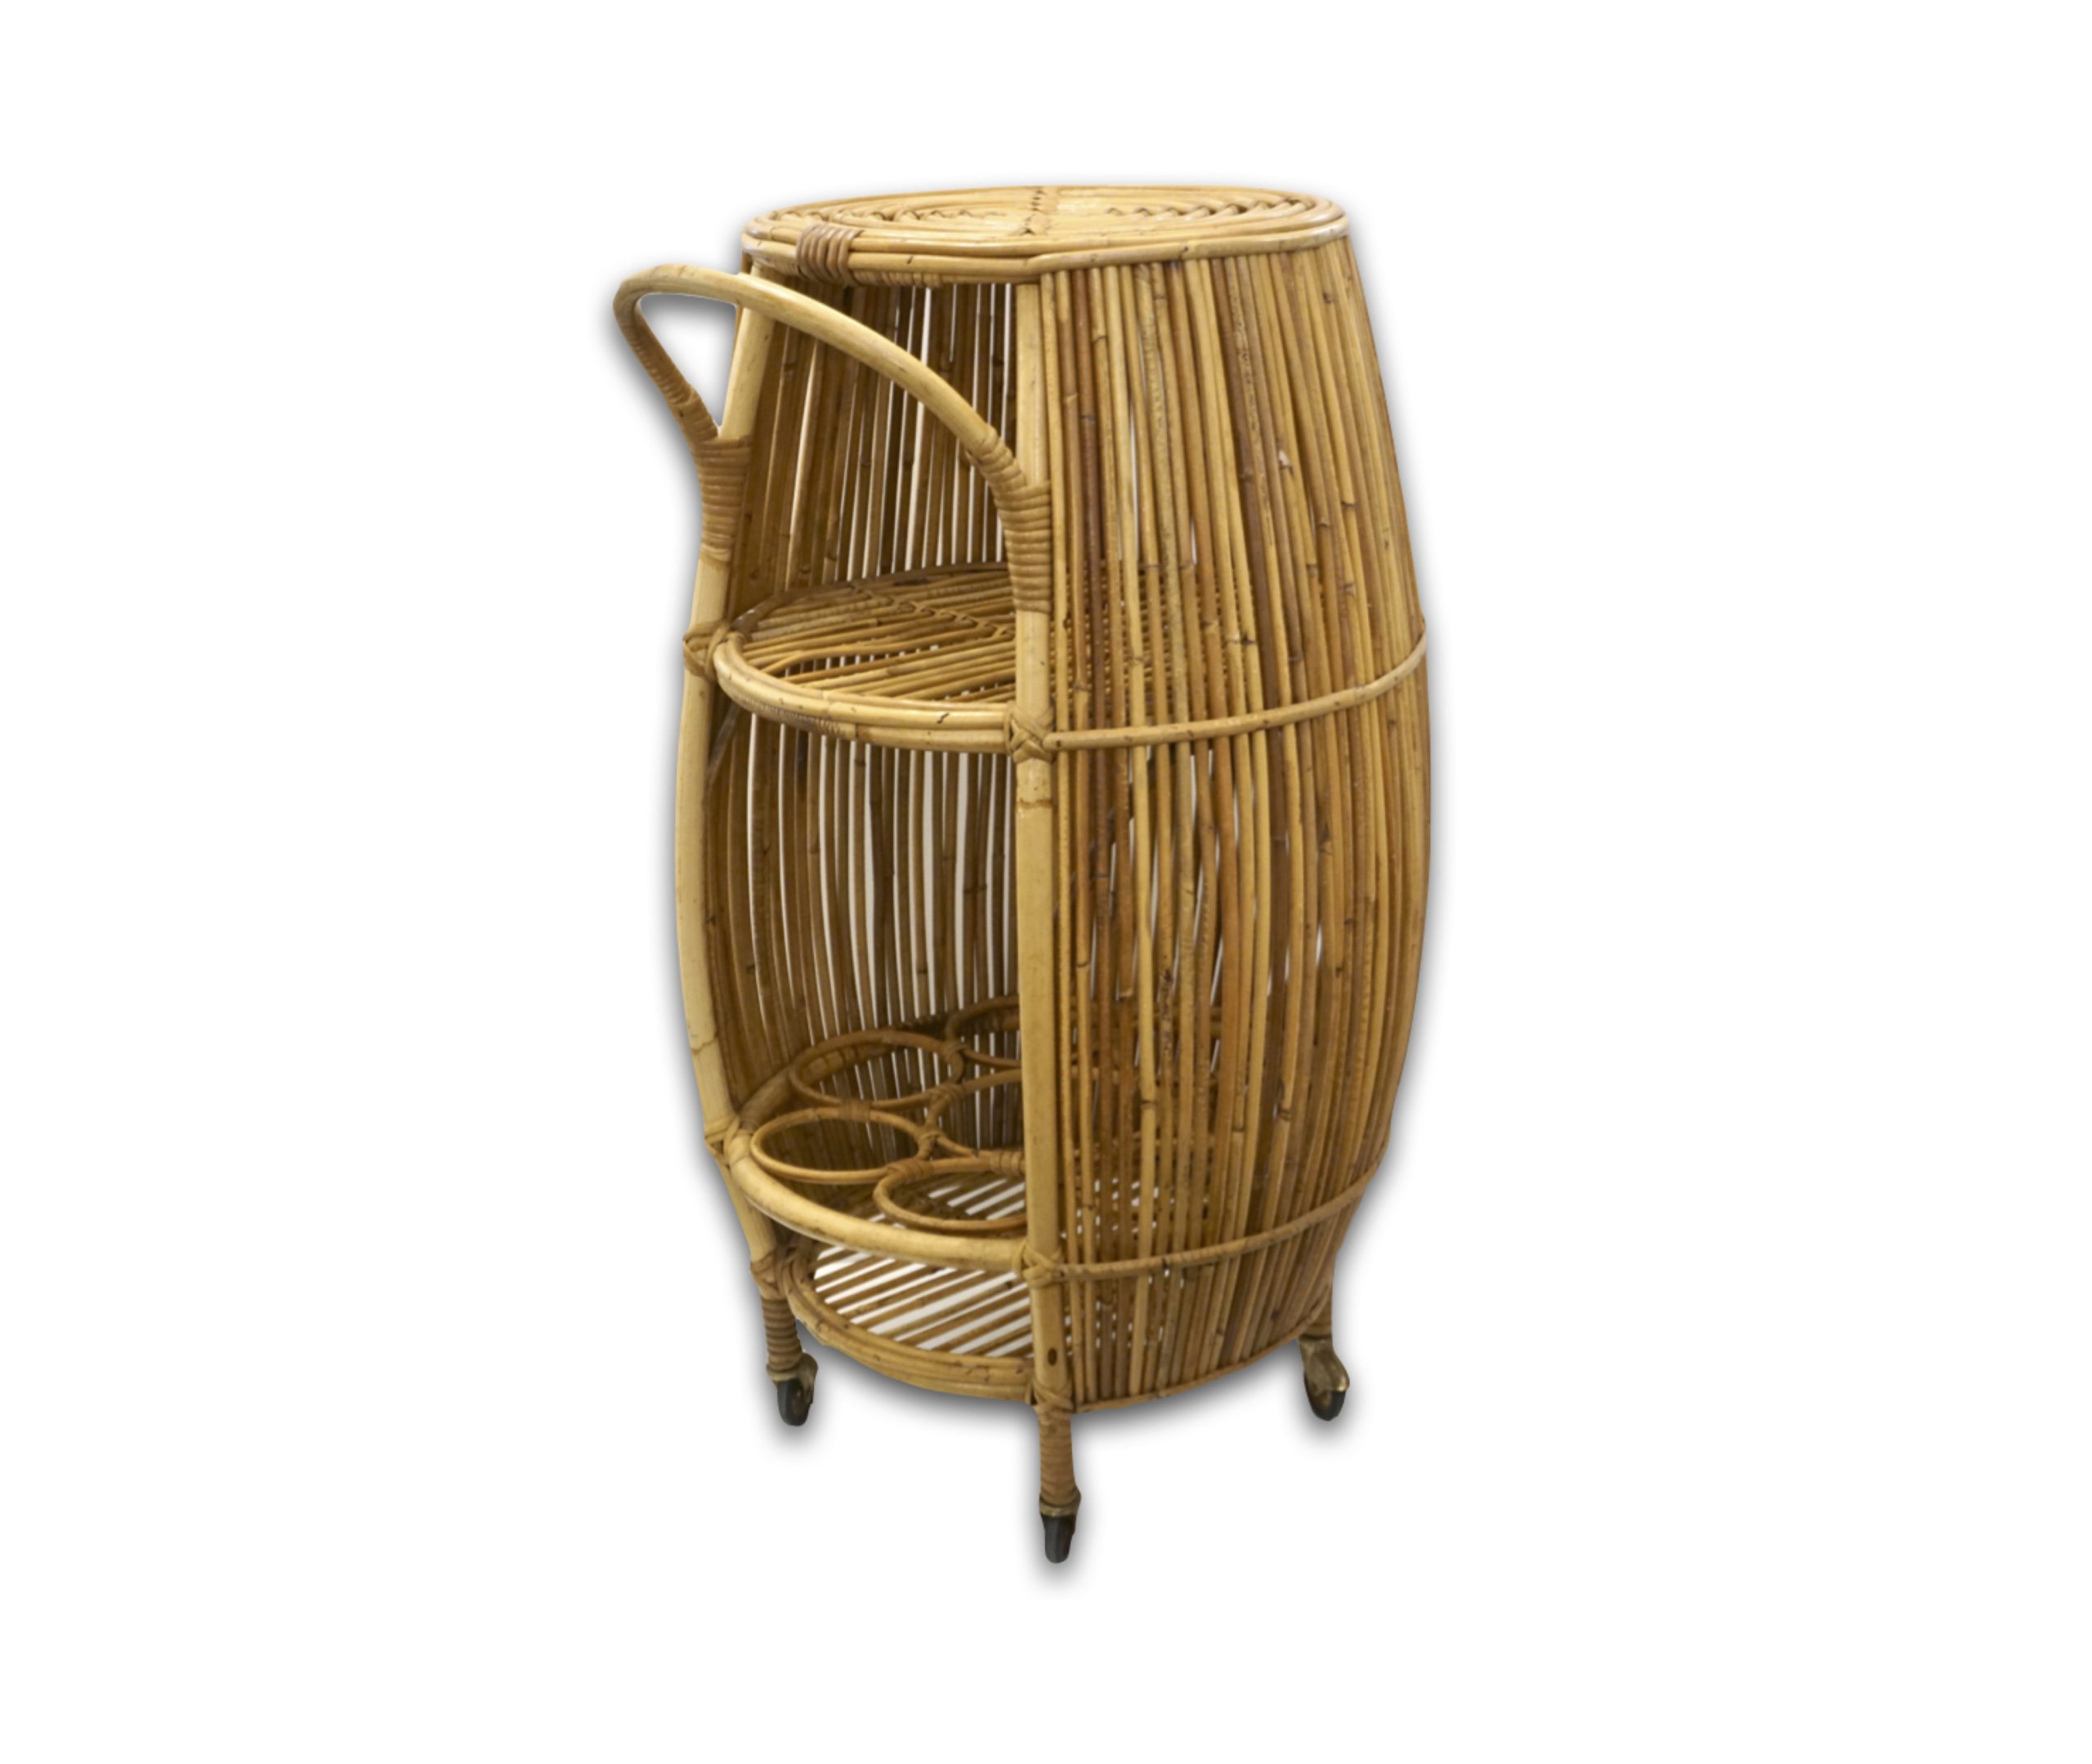 cosulich_interiors_and_antiques_products_new_york_design_bonacina_1950_italian_mid_century_modernnatural_rattan_cylindrical_bar_trolley_side-scaled-1